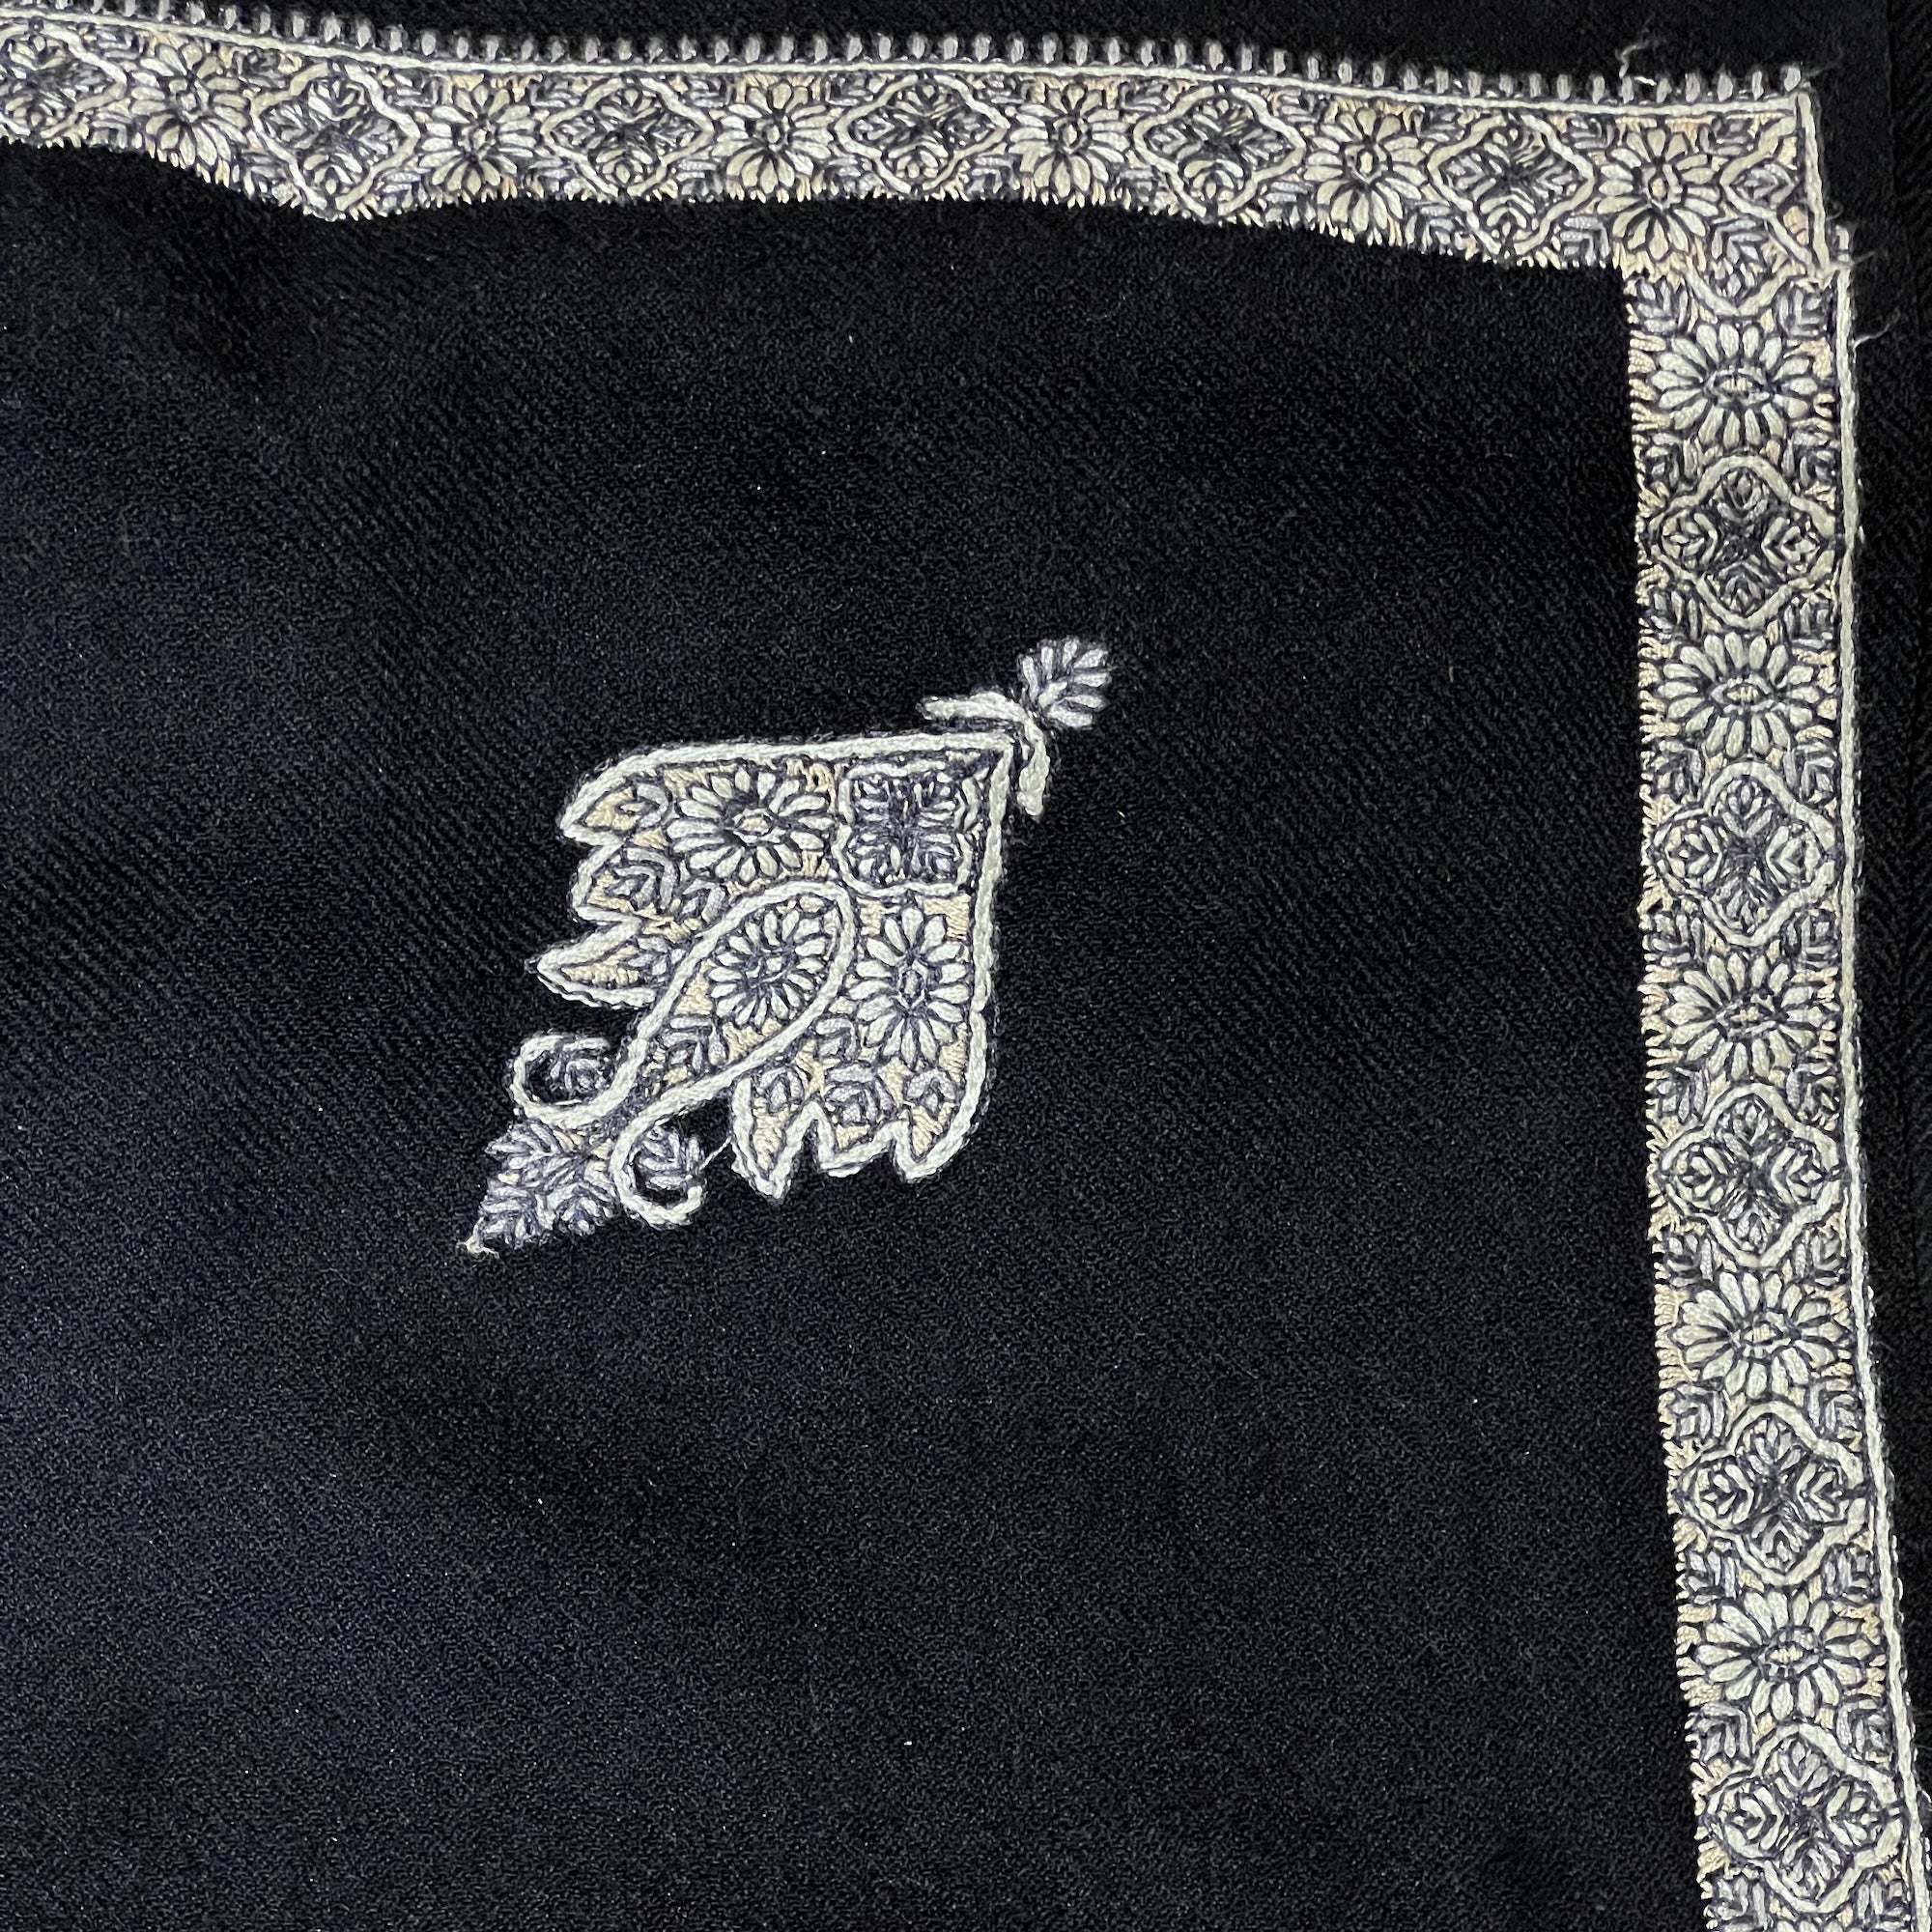 AM Black Embroidered Woolen Shawl - Vintage India NYC